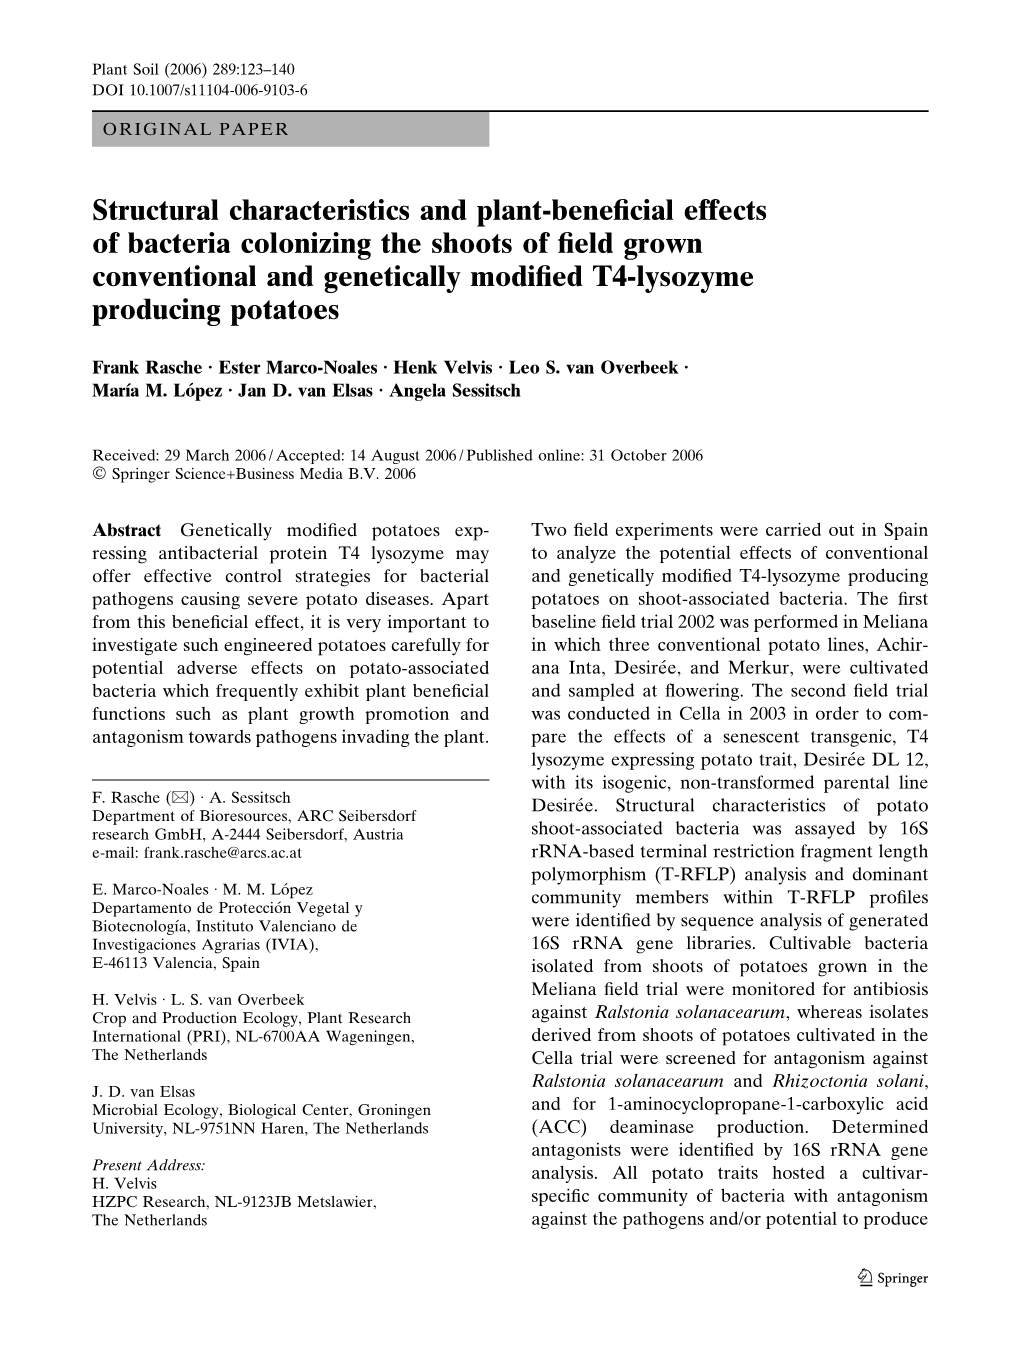 Structural Characteristics and Plant-Beneficial Effects of Bacteria